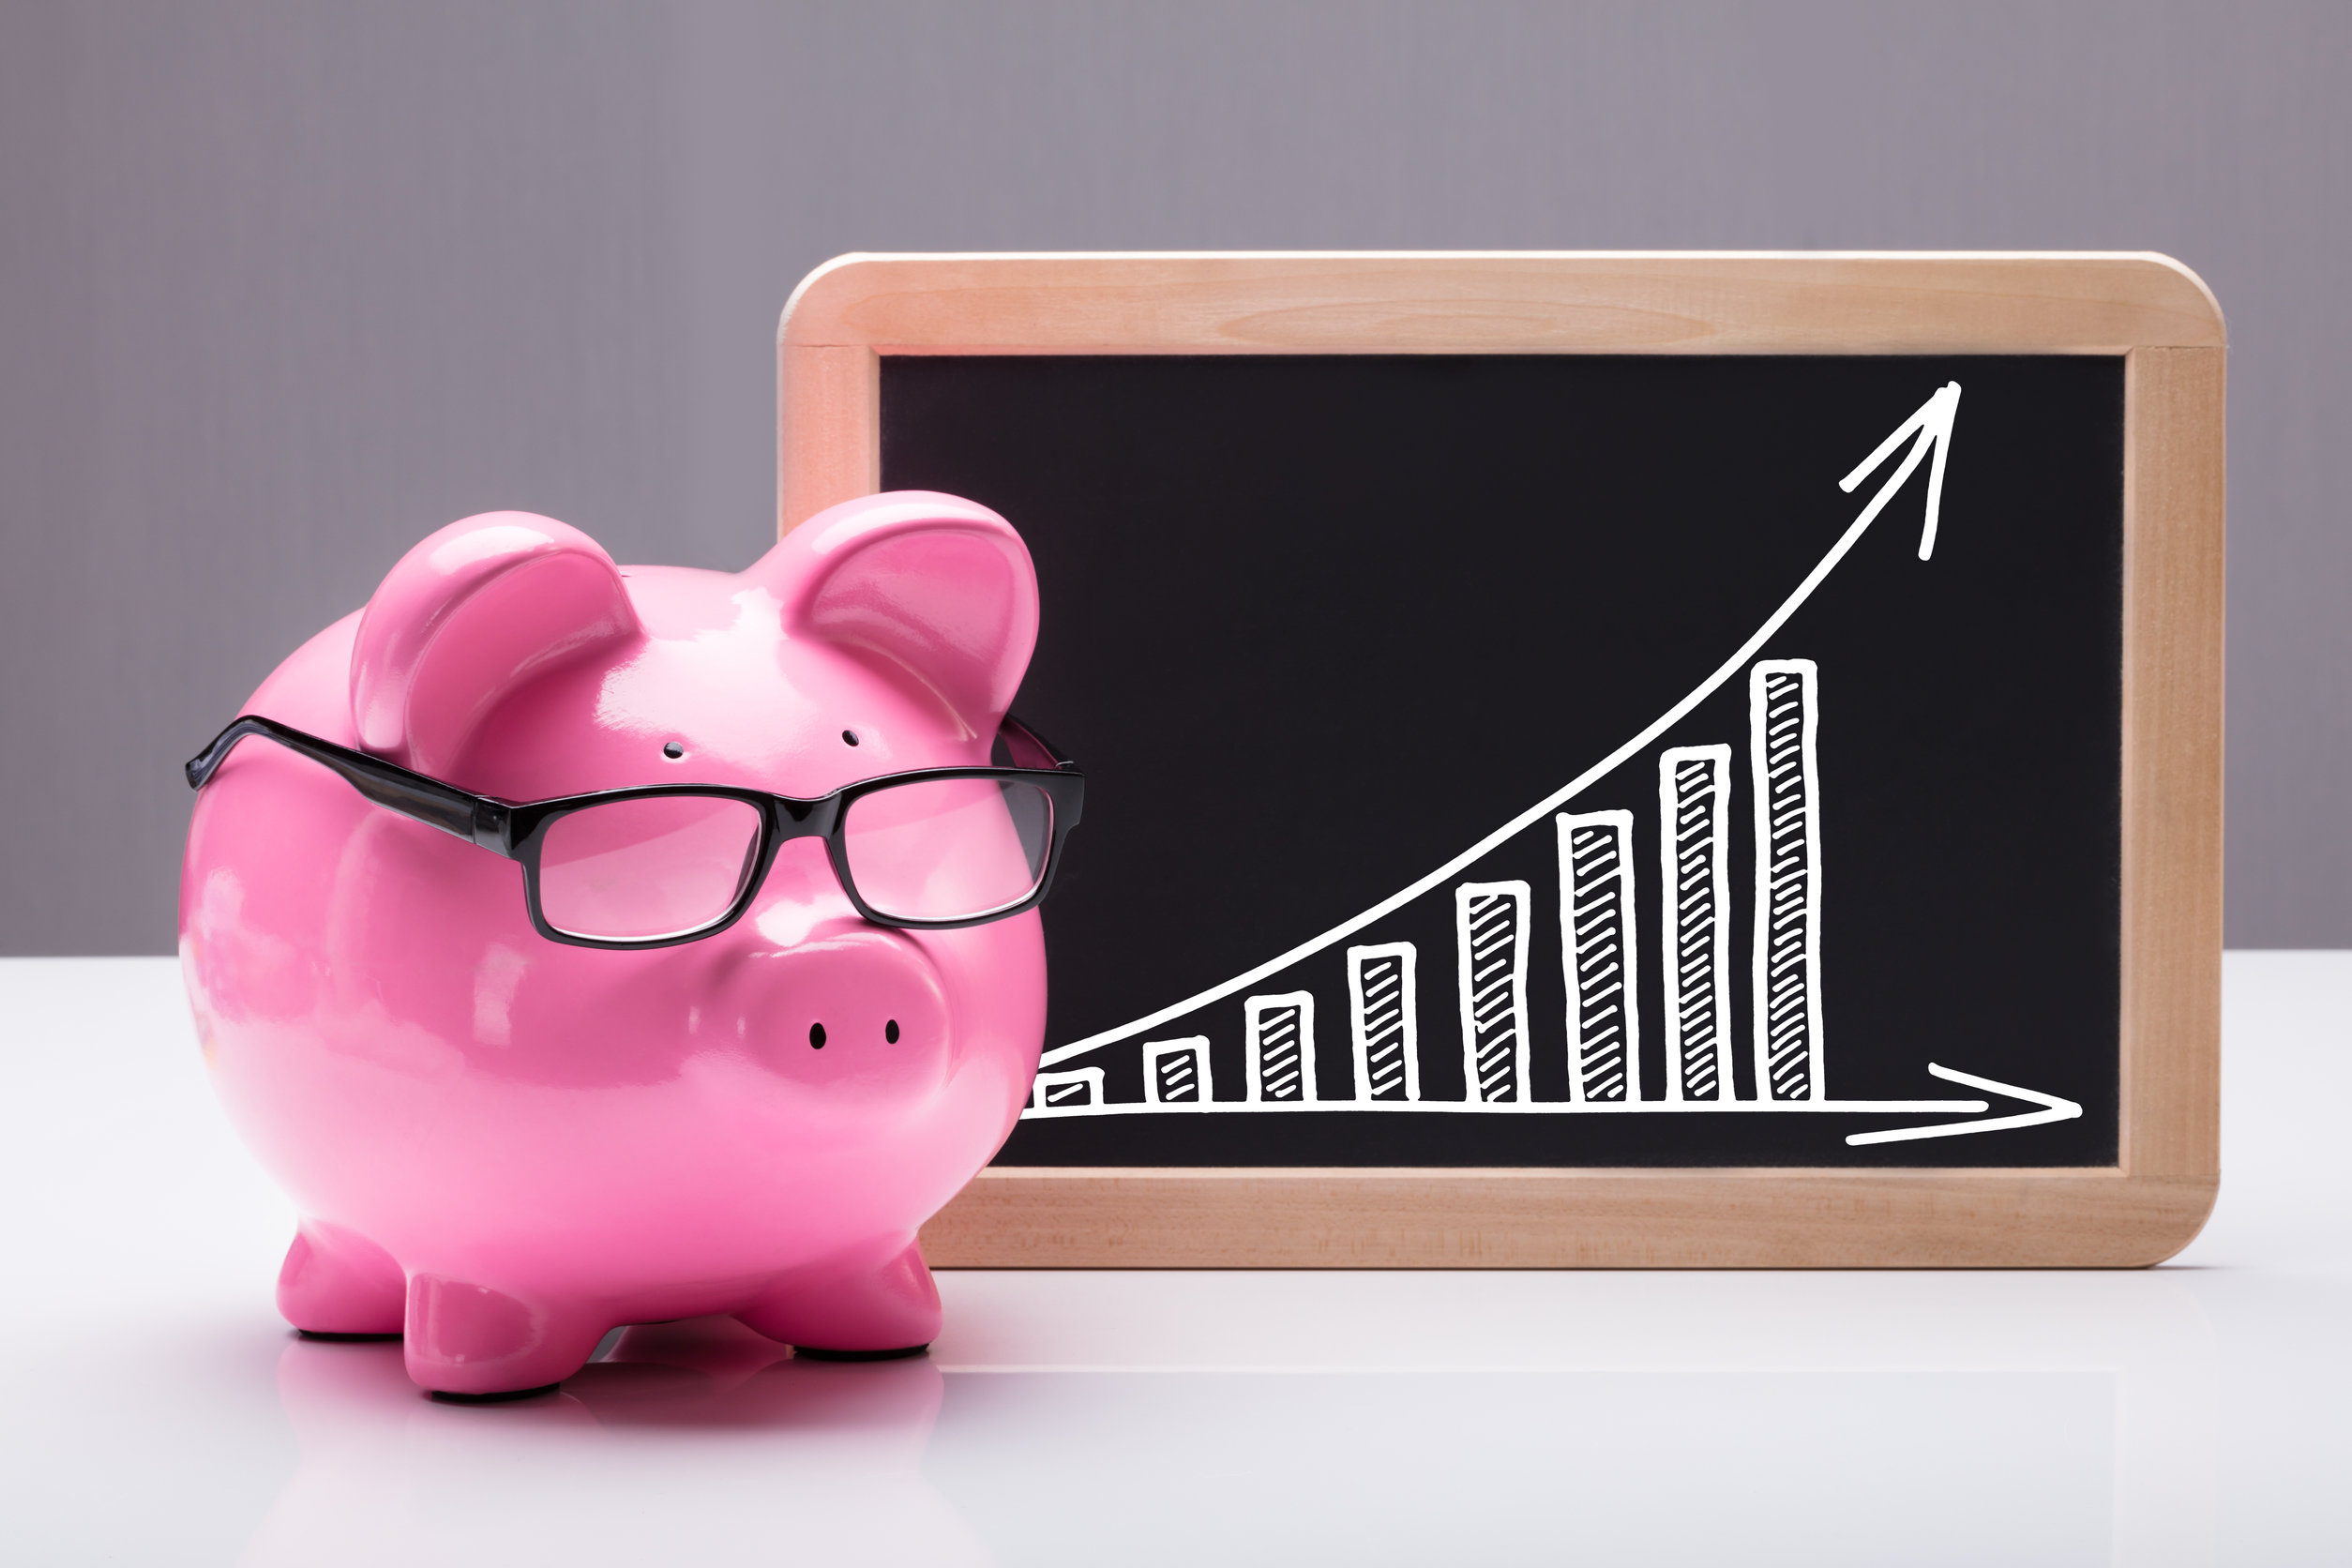 Pink Pig Piggy Bank Near Chart With Arrow Showing Progress And Growth On Slate